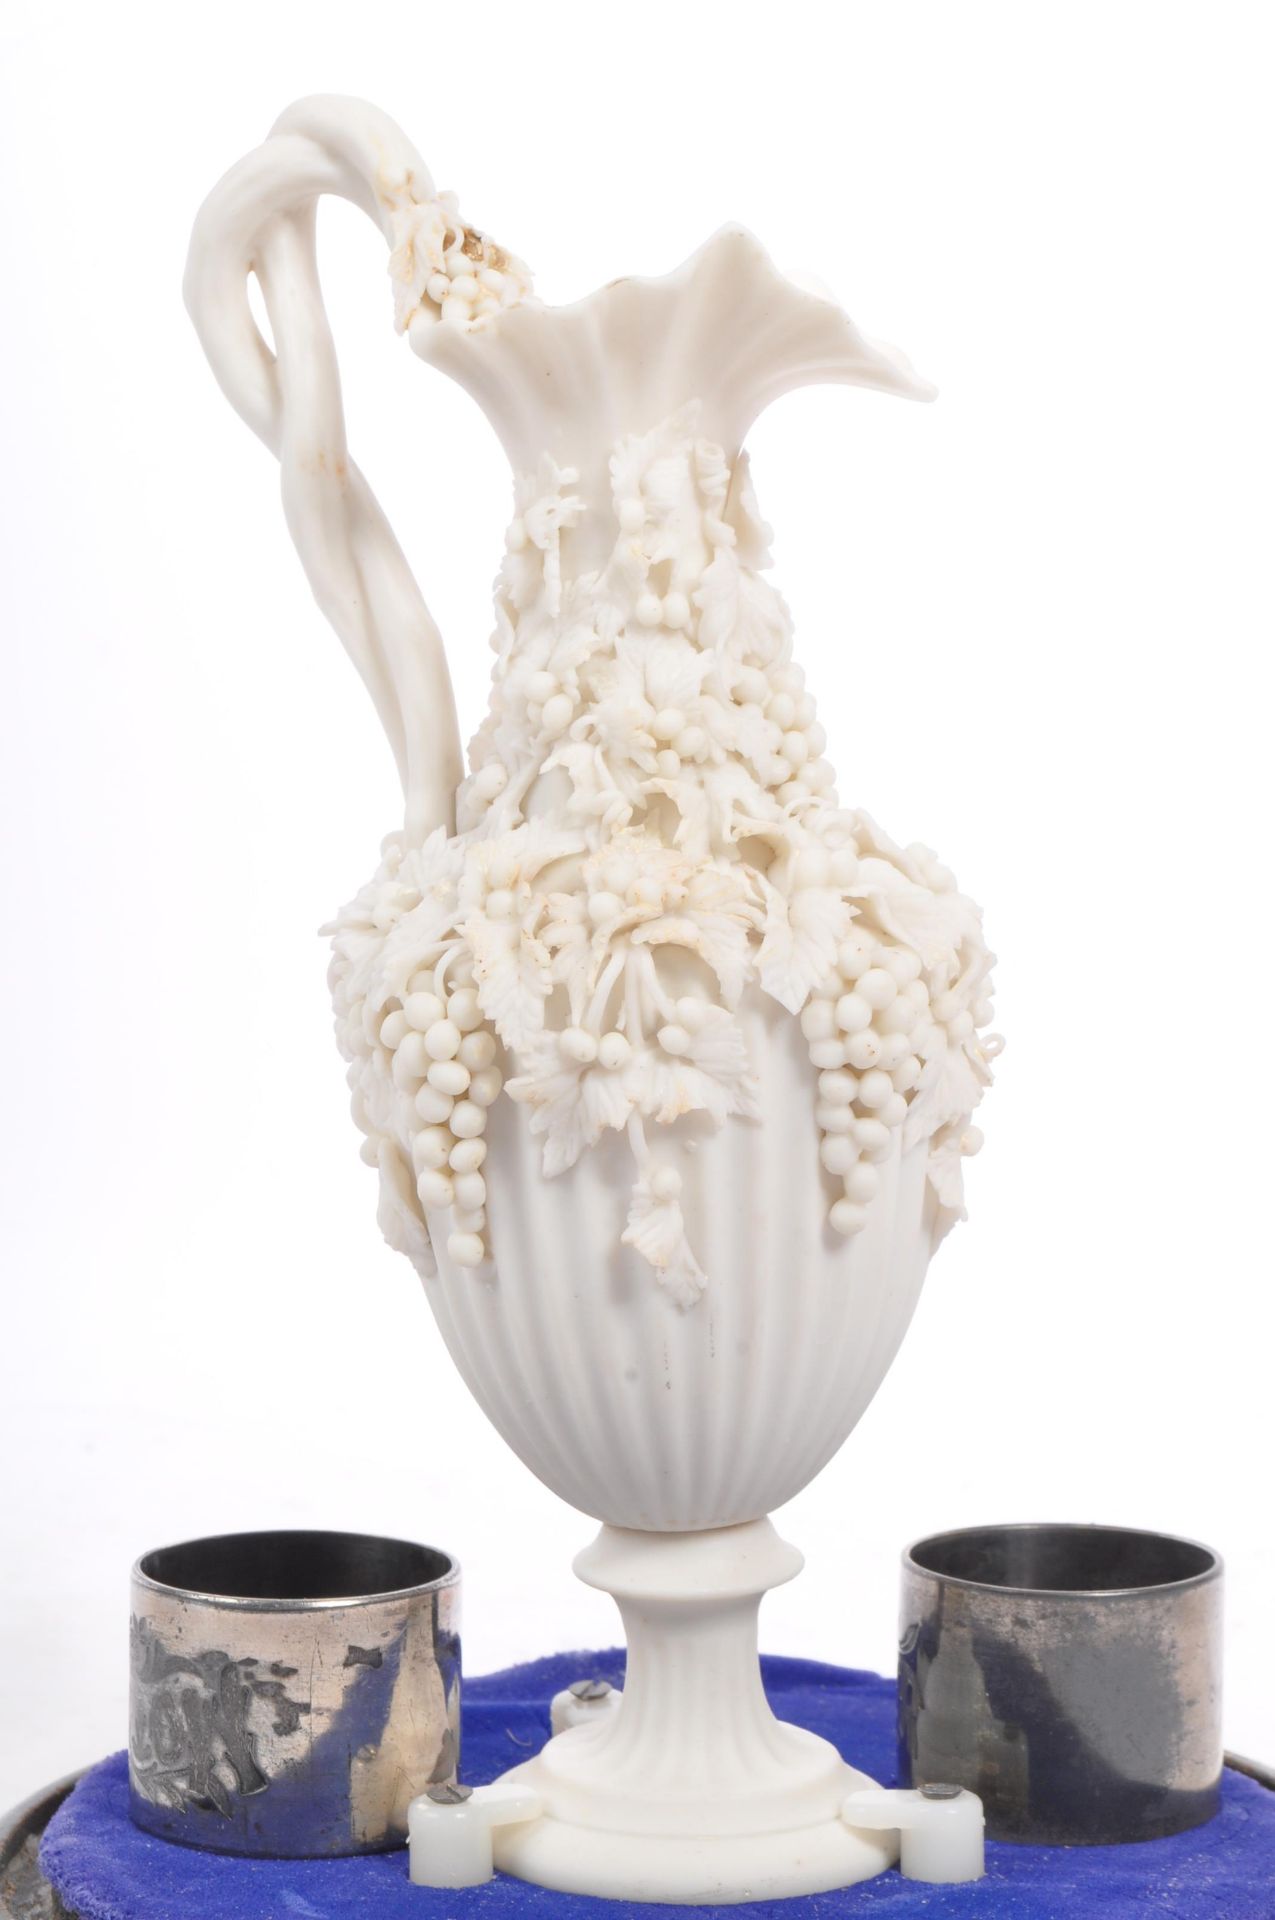 19TH CENTURY VICTORIAN GLASS DOMED WHITE BISQUE EWER VASE - Image 5 of 8